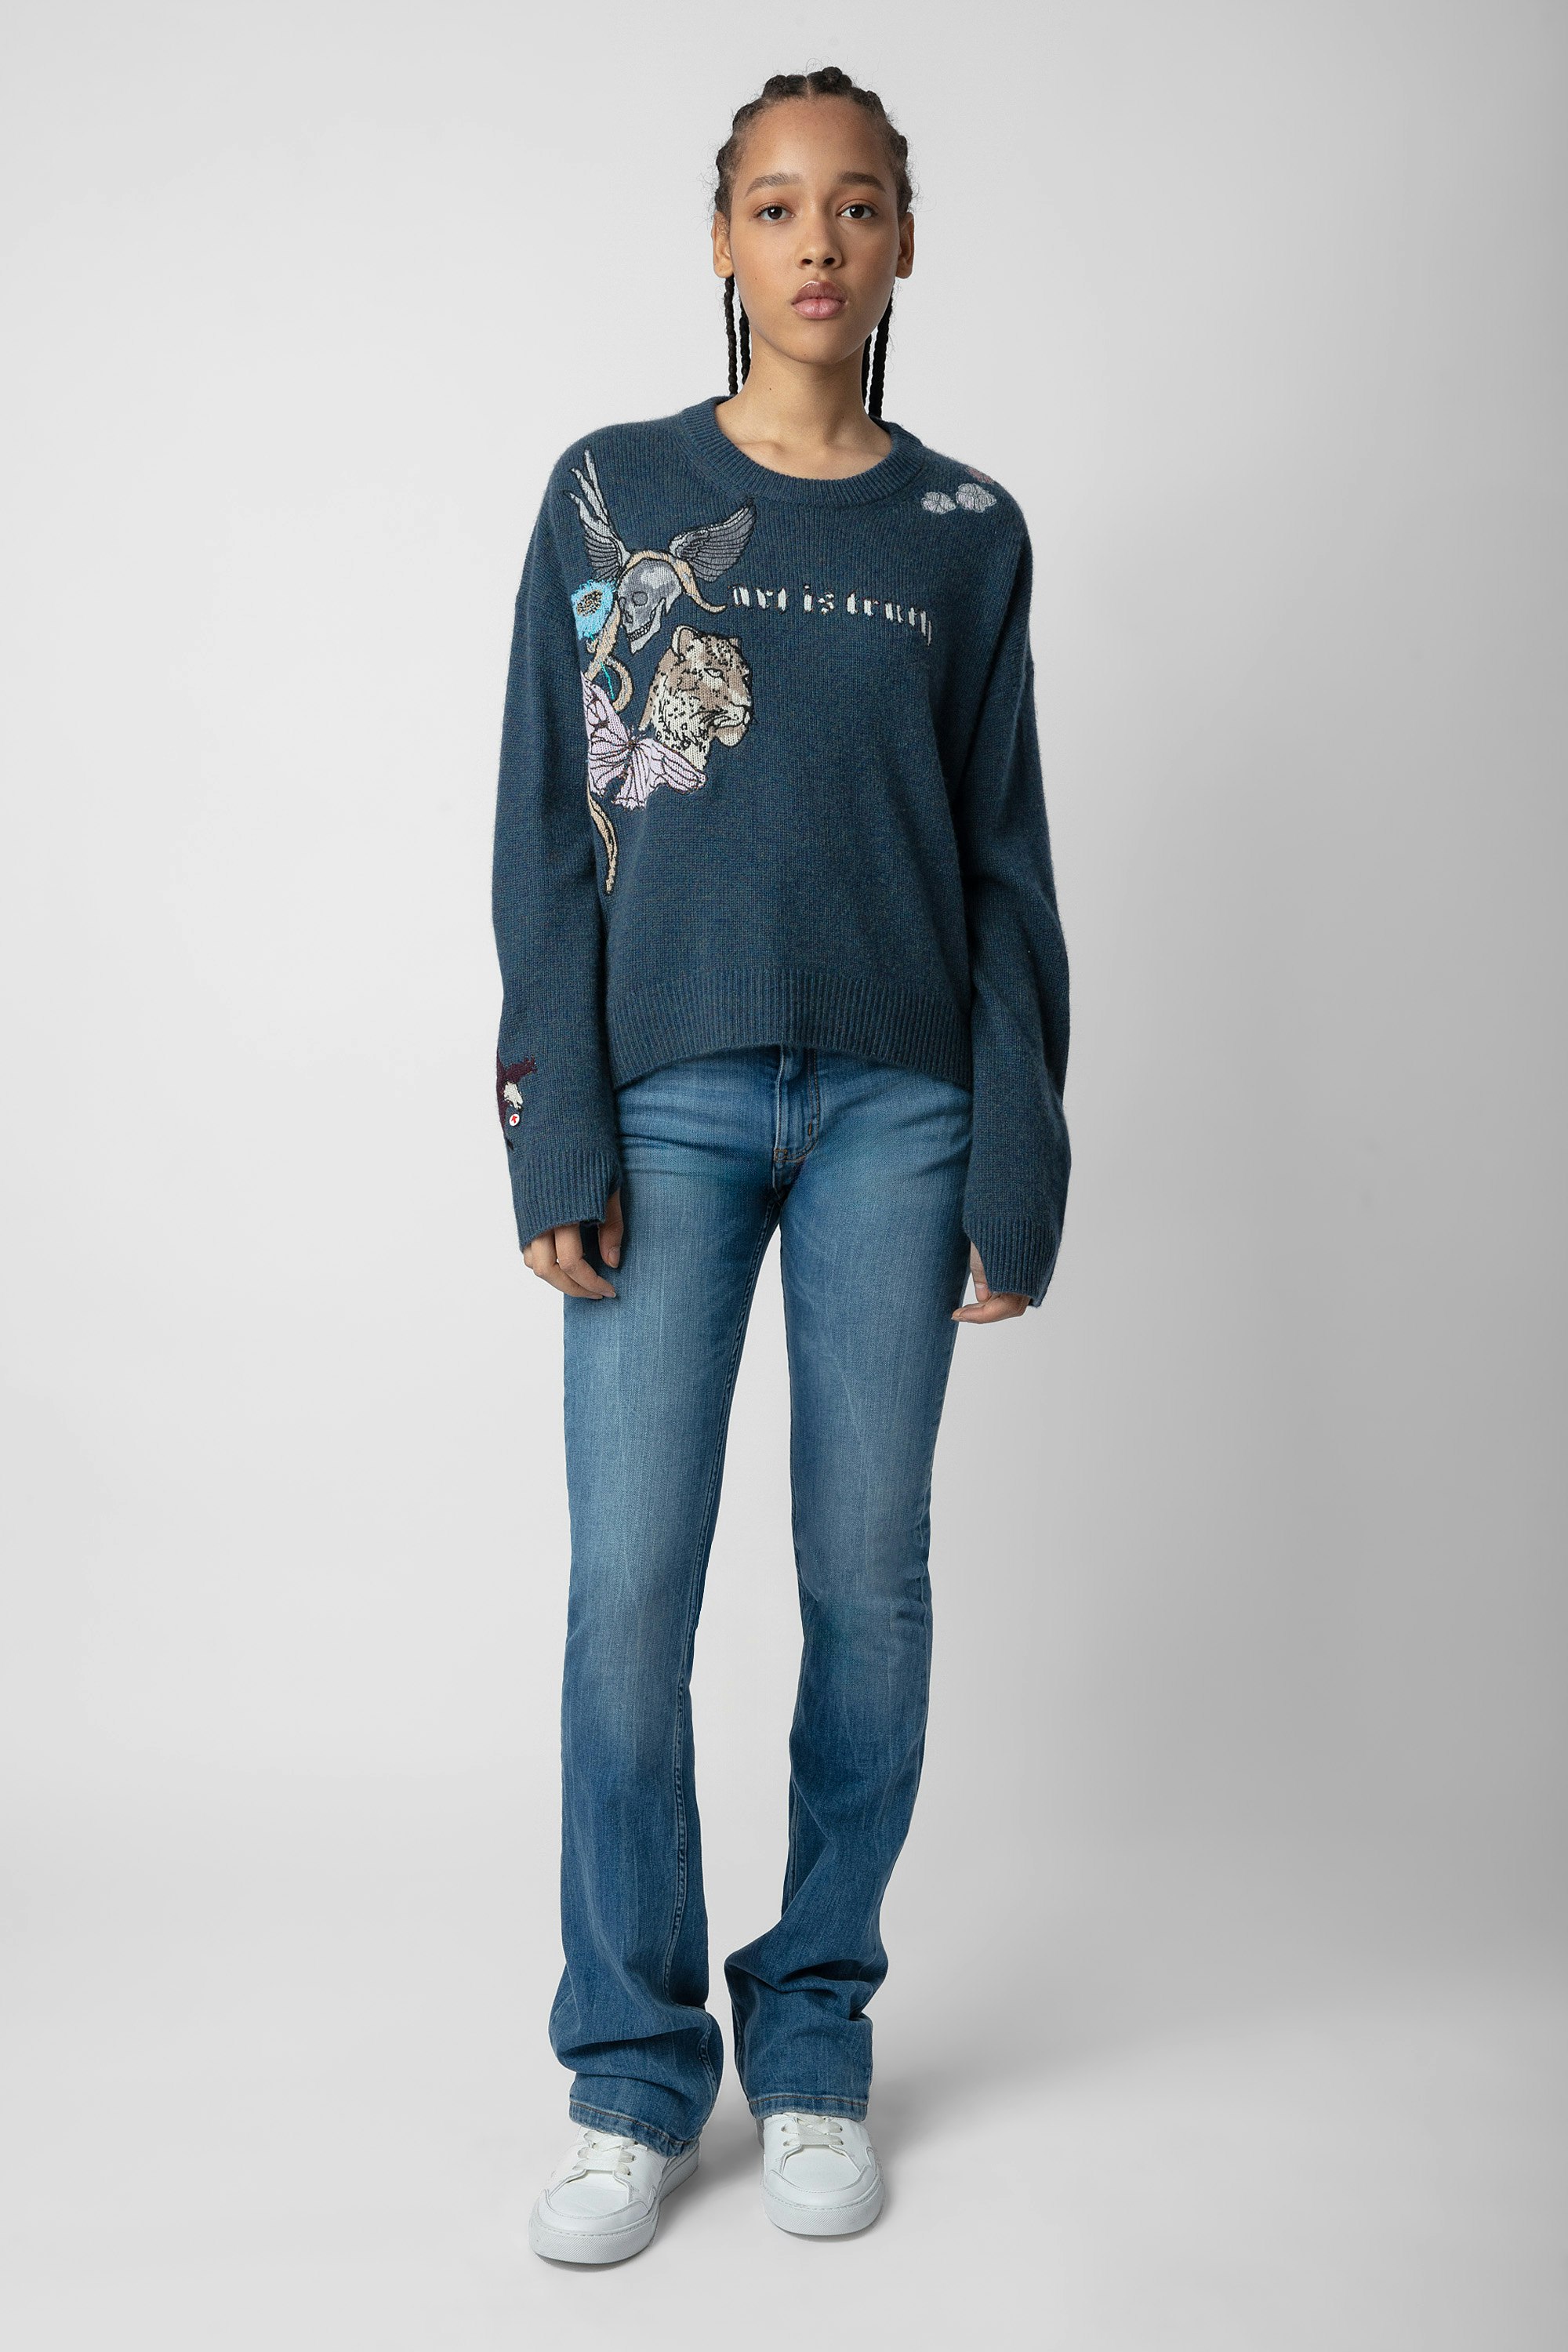 Markus Cashmere Sweater  - Women’s blue cashmere sweater with motifs and the slogans “Art is truth” and “La quintessence de l’amour”.